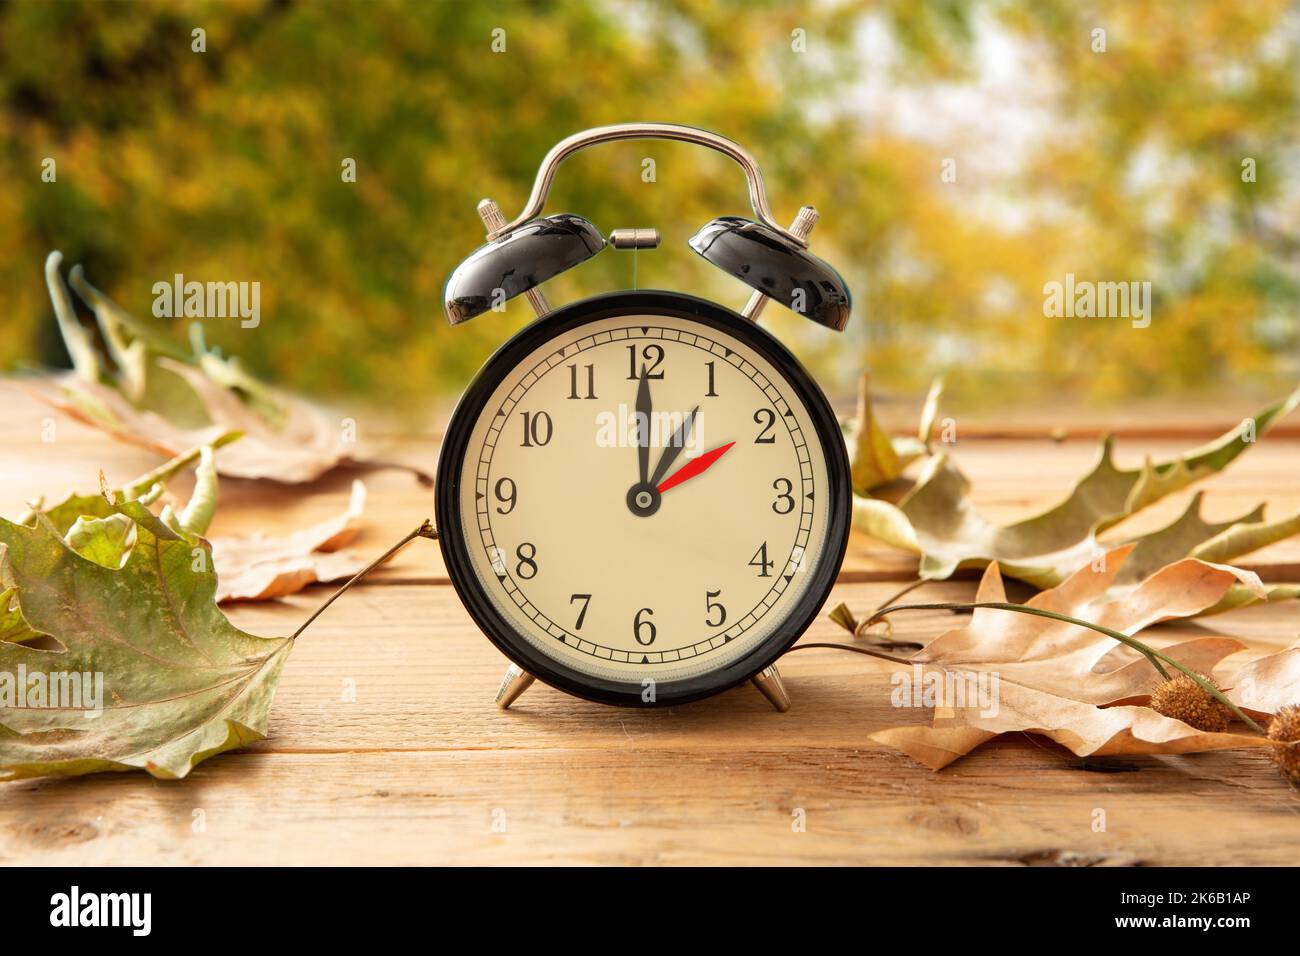 Fall Back one hour. Daylight Saving Time, Black alarm clock with time change on wooden table. Autumn trees and leaves background Stock Photo